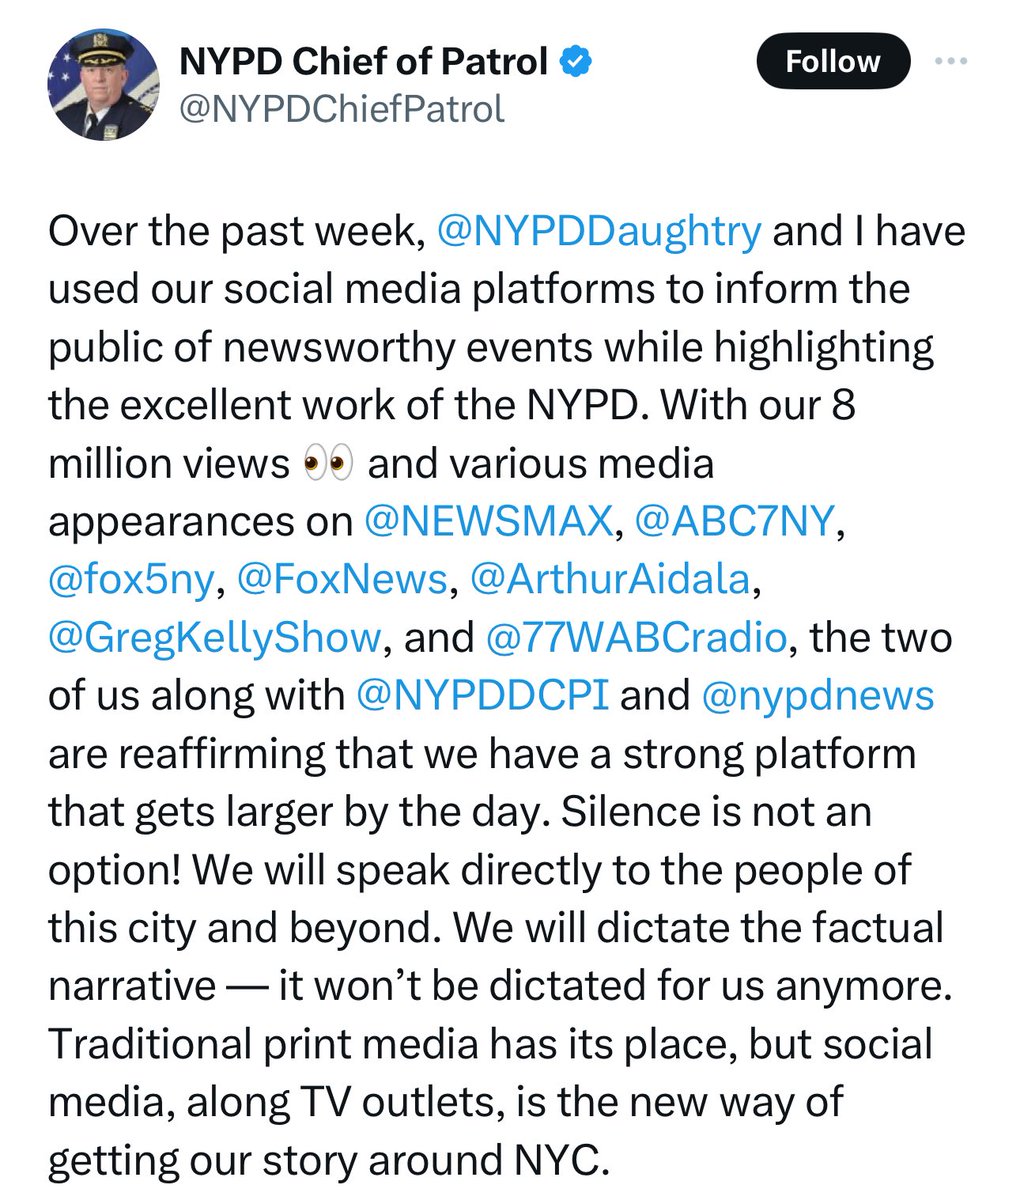 NYPD spokesperson shares that a major part of their new strategy is going on right wing media outlets all day